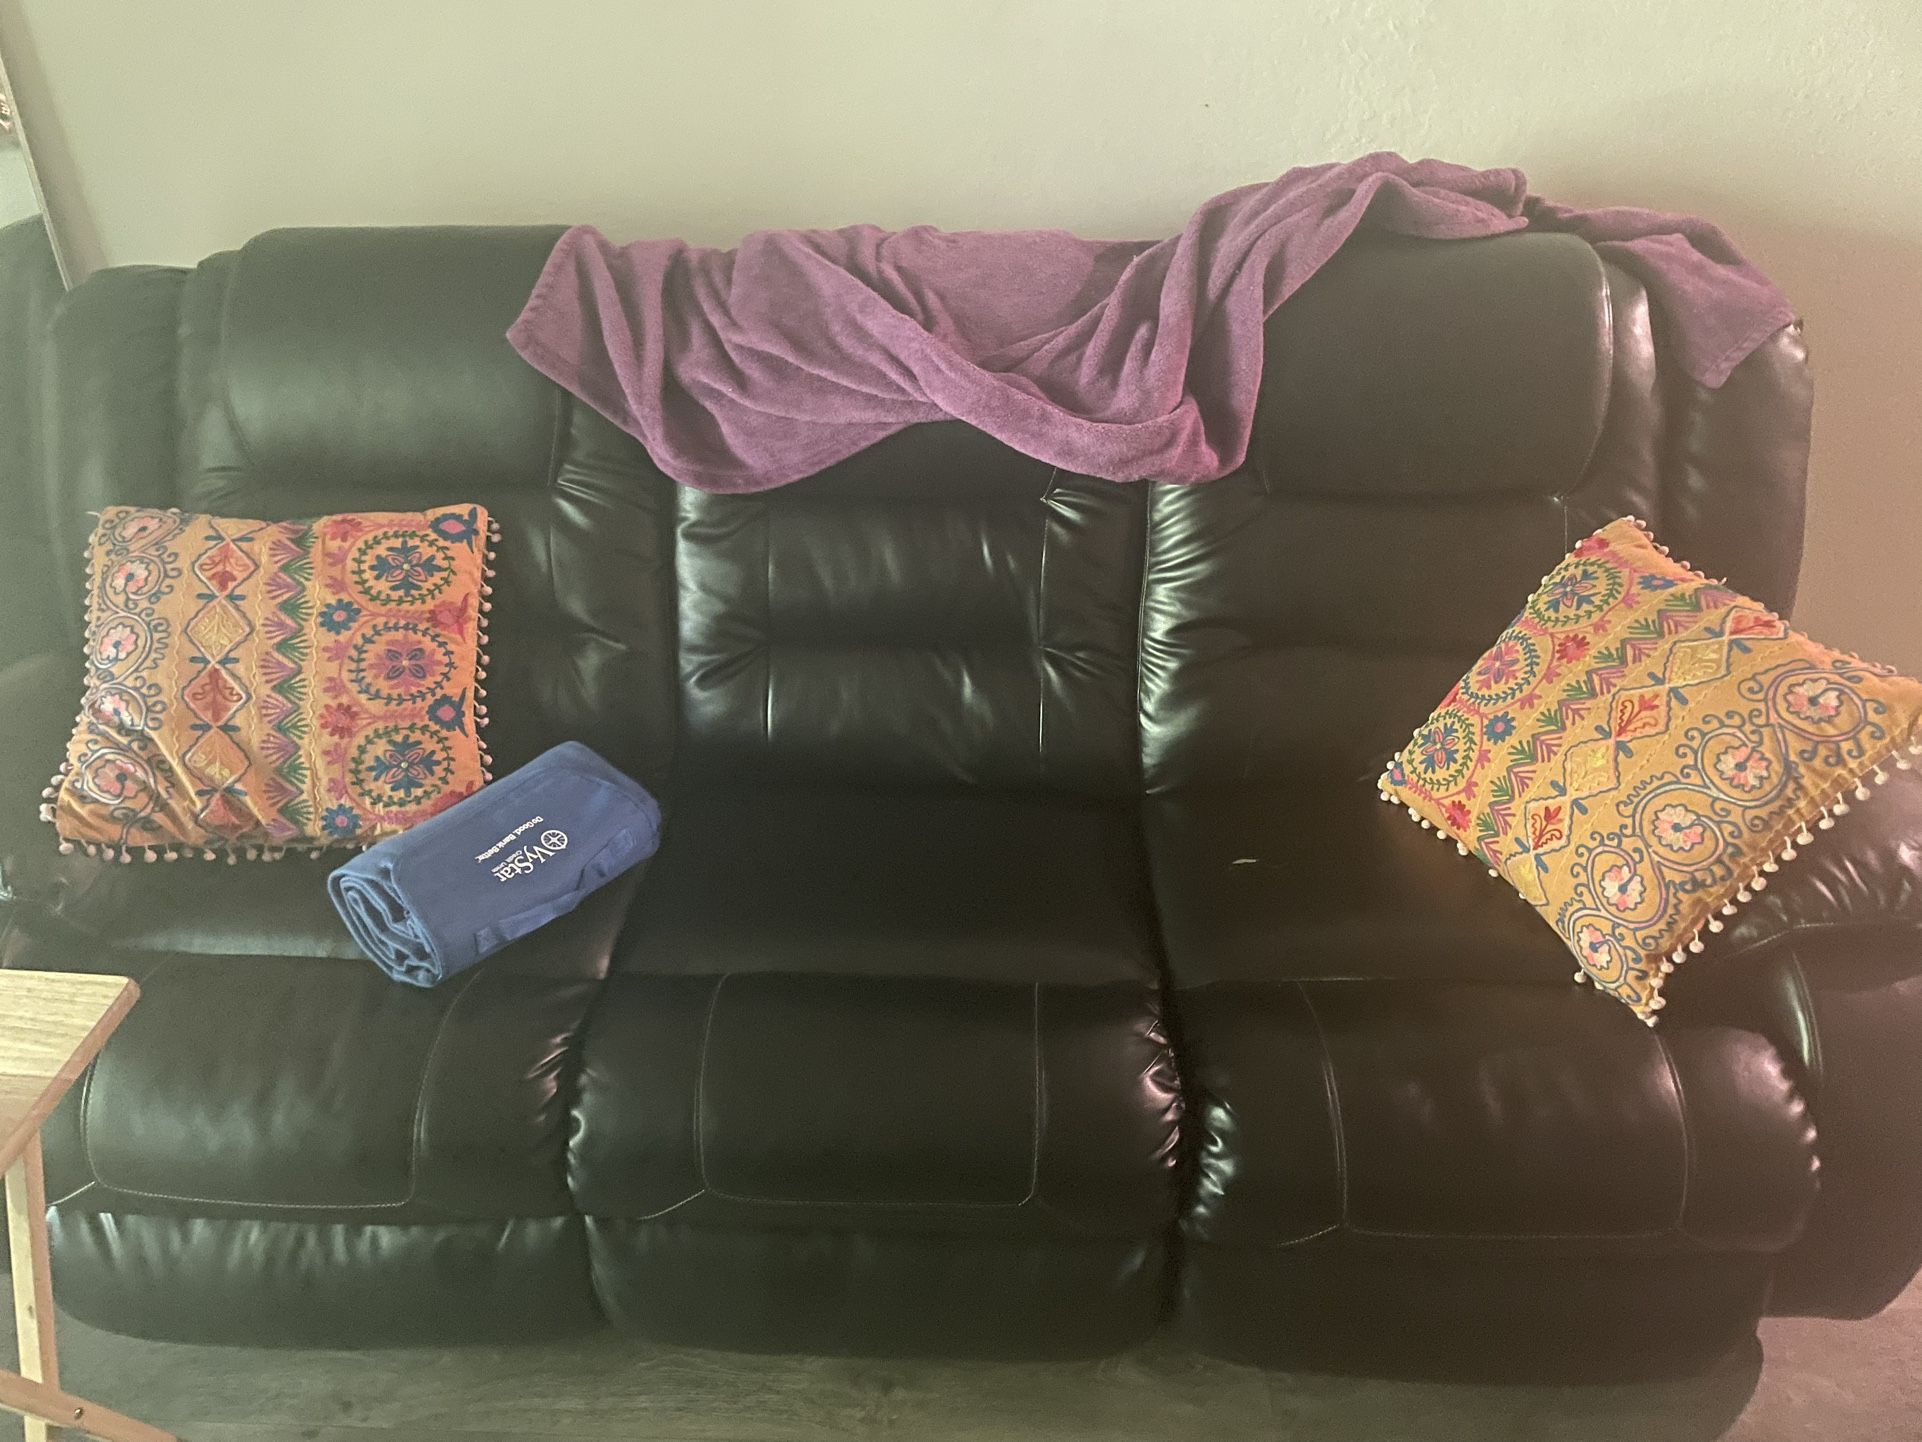 Sofas For Sale 